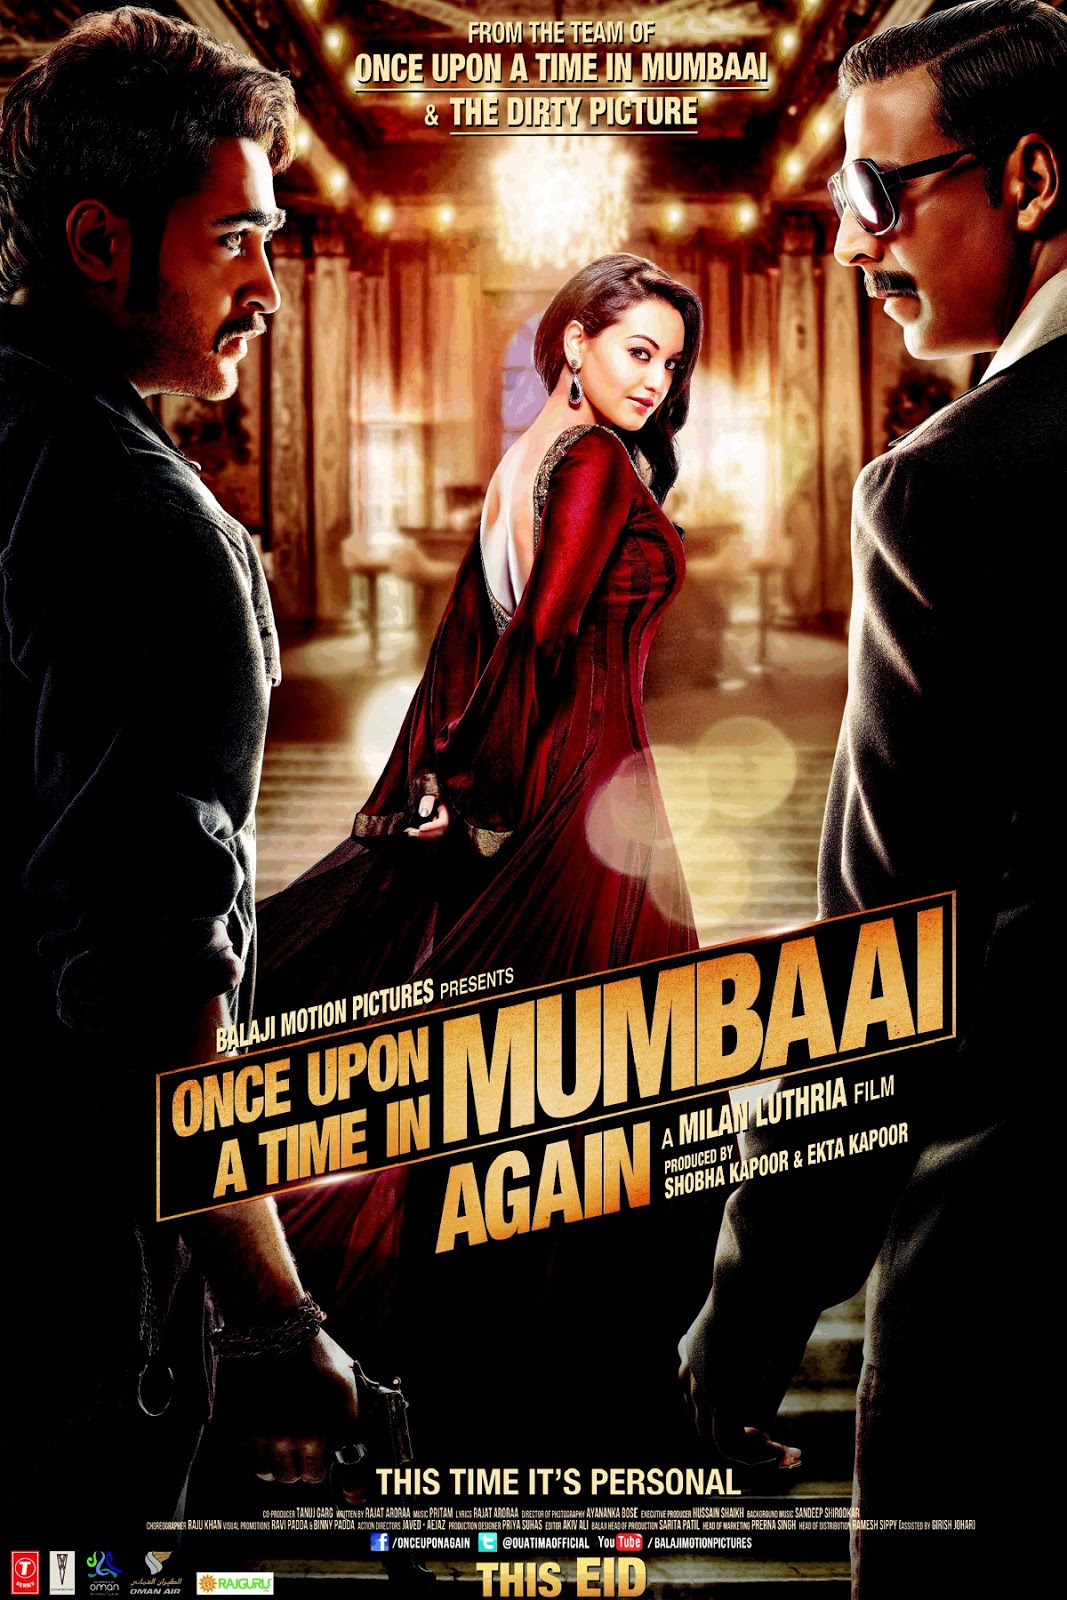 Once Upon a Time in Mumbai Dobaara! Latest HD wallpapers - HD ...